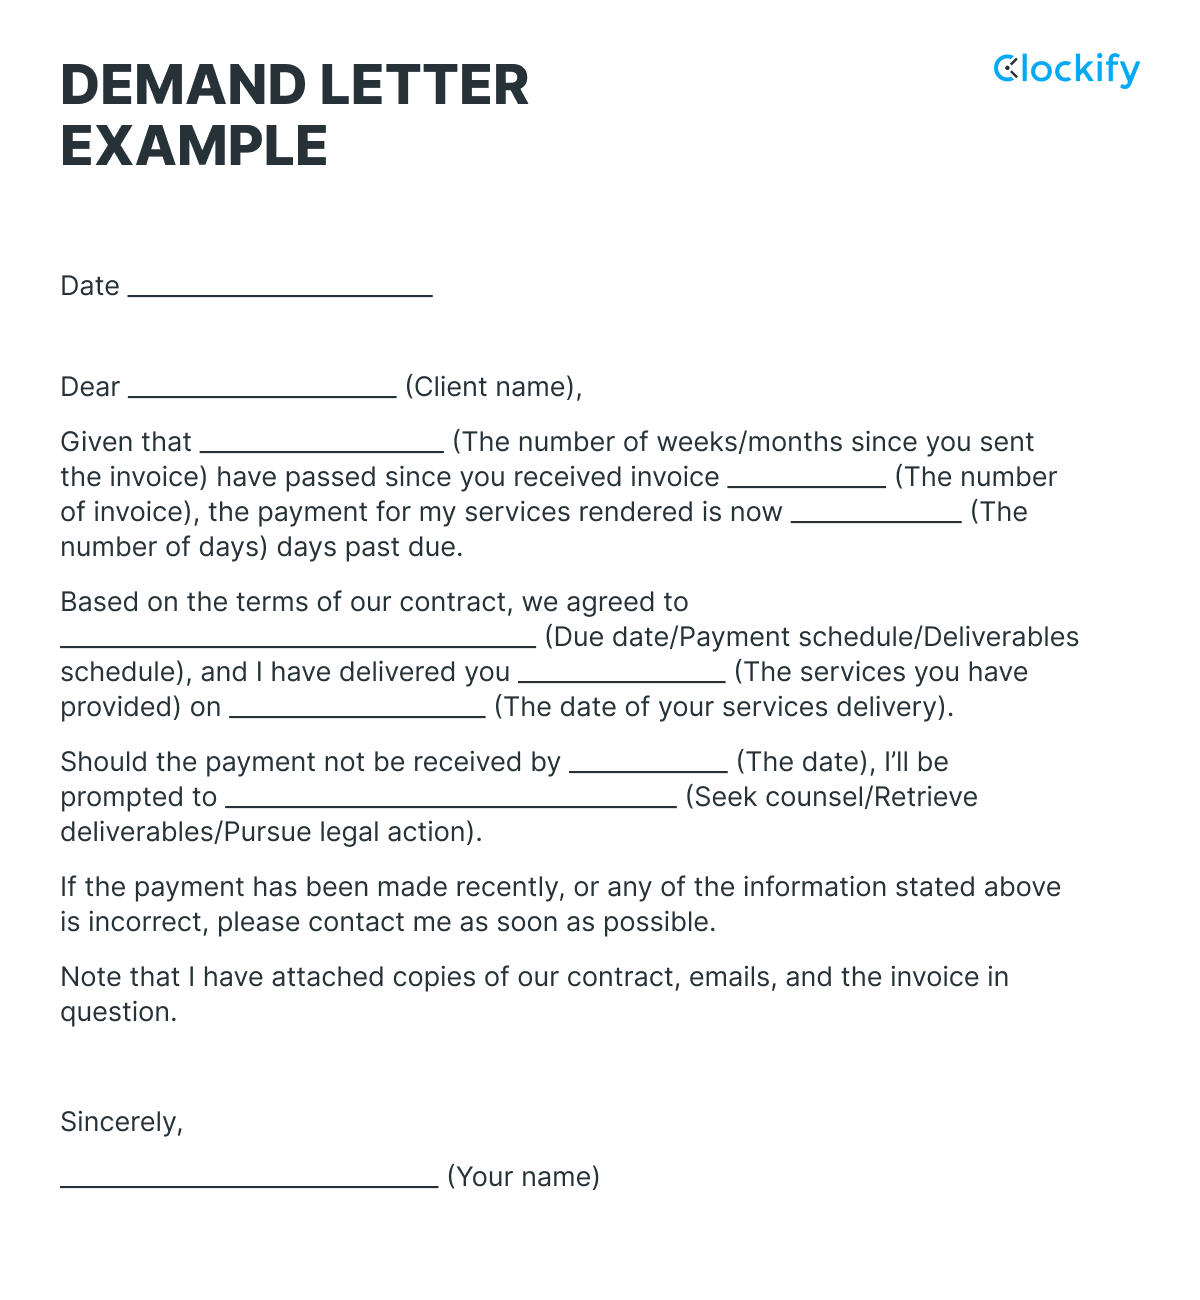 Demand letter example